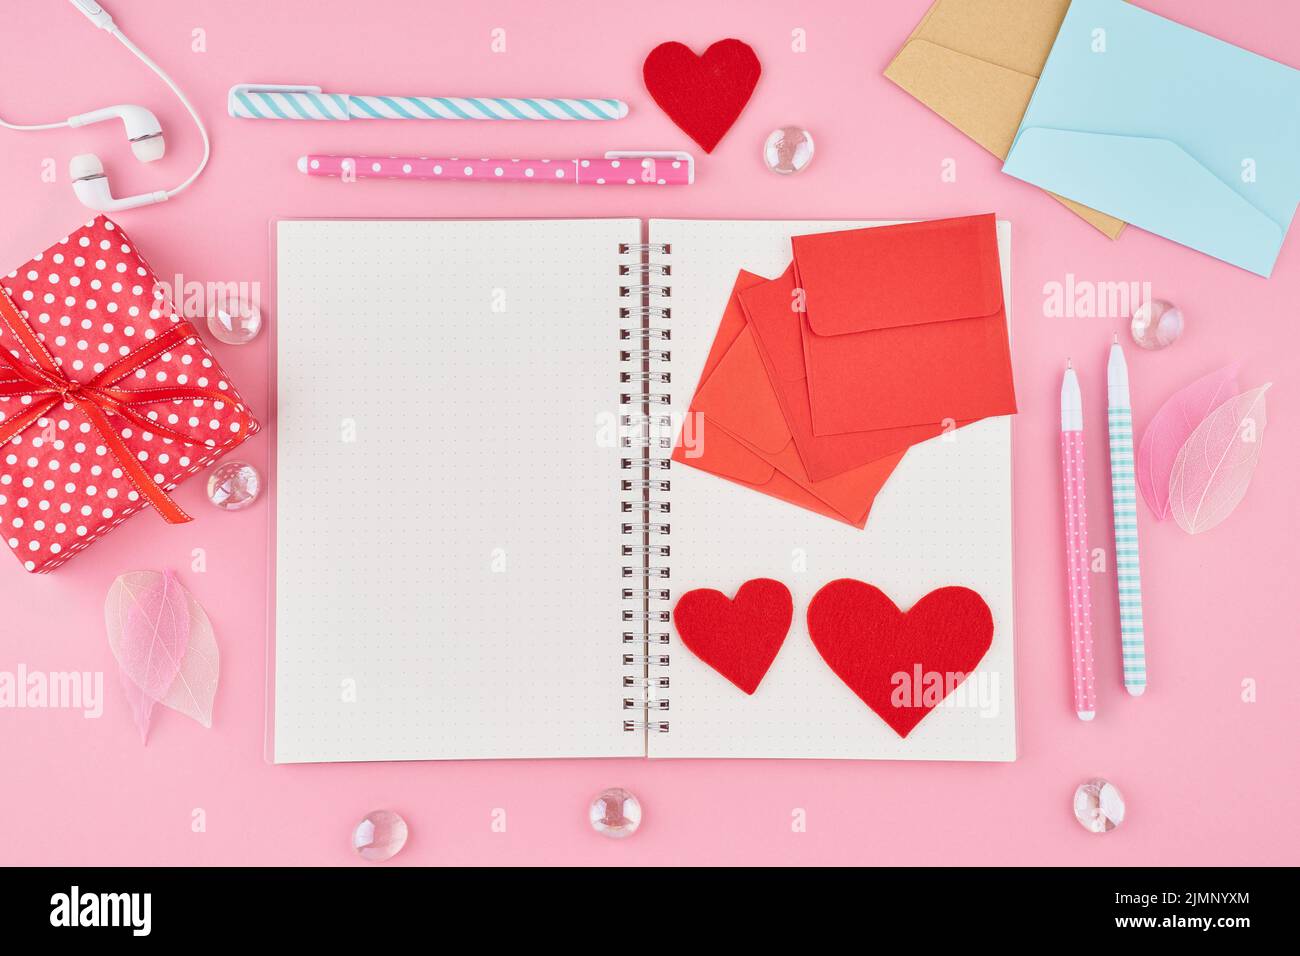 The concept of writing note, letters for Valentine's Day. Notepad page Stock Photo